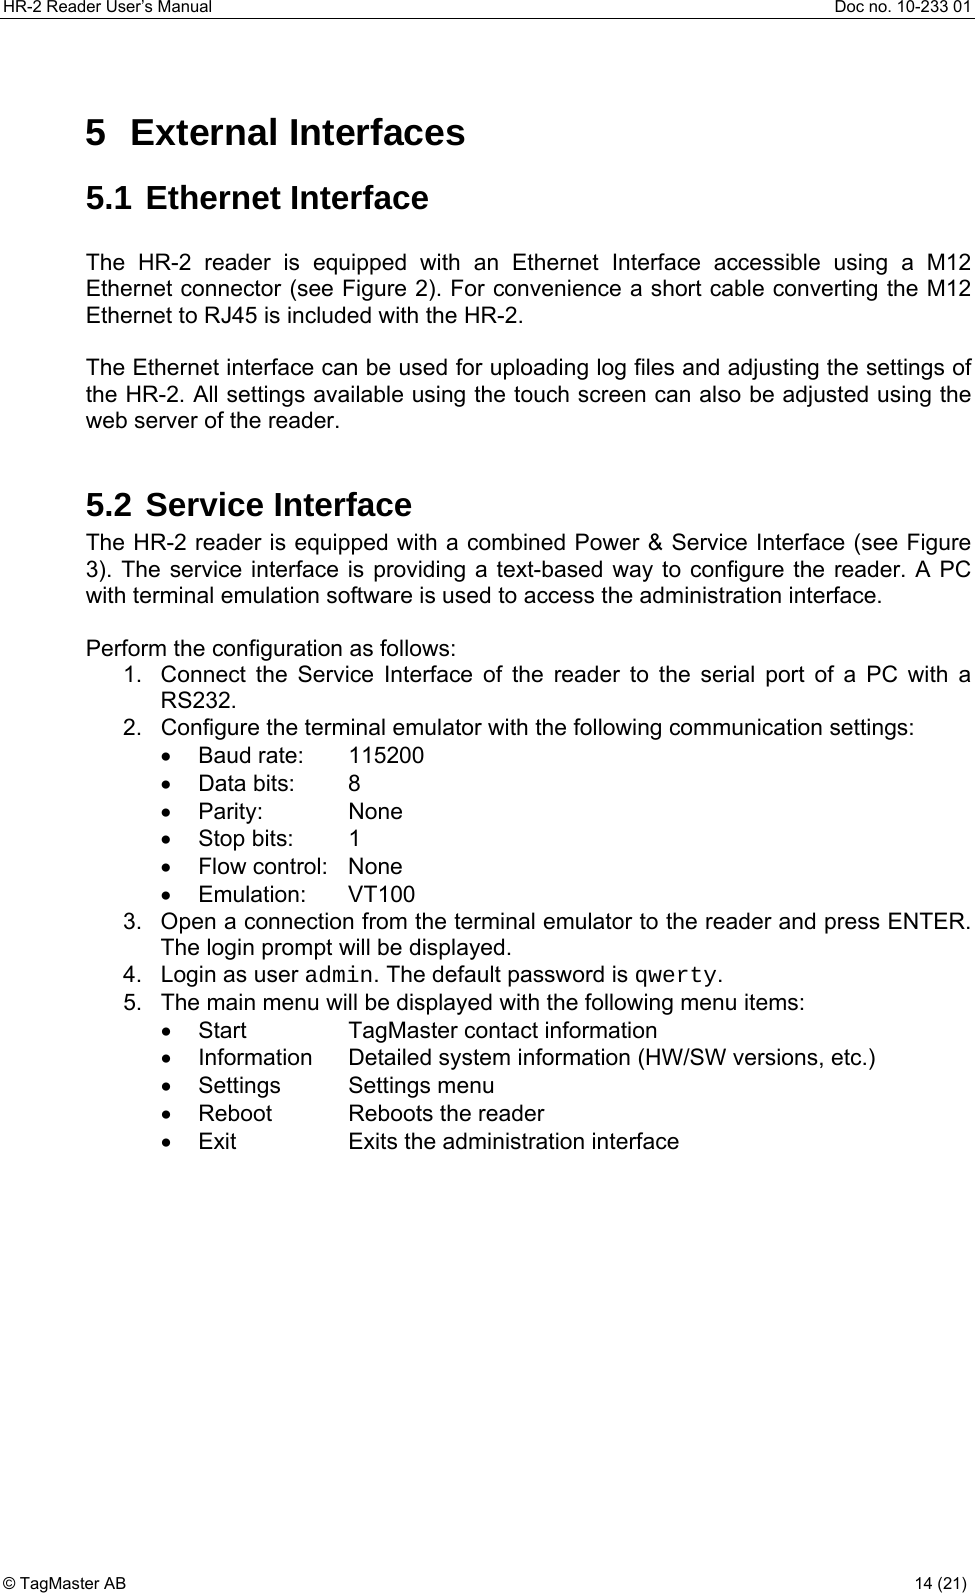 HR-2 Reader User’s Manual  Doc no. 10-233 01 © TagMaster AB  14 (21)   5 External Interfaces 5.1 Ethernet Interface  The HR-2 reader is equipped with an Ethernet Interface accessible using a M12 Ethernet connector (see Figure 2). For convenience a short cable converting the M12 Ethernet to RJ45 is included with the HR-2.  The Ethernet interface can be used for uploading log files and adjusting the settings of the HR-2. All settings available using the touch screen can also be adjusted using the web server of the reader.  5.2 Service Interface The HR-2 reader is equipped with a combined Power &amp; Service Interface (see Figure 3). The service interface is providing a text-based way to configure the reader. A PC with terminal emulation software is used to access the administration interface.  Perform the configuration as follows: 1.  Connect the Service Interface of the reader to the serial port of a PC with a RS232. 2.  Configure the terminal emulator with the following communication settings: • Baud rate:  115200 • Data bits:  8 • Parity:  None • Stop bits:  1 • Flow control: None • Emulation:  VT100 3.  Open a connection from the terminal emulator to the reader and press ENTER. The login prompt will be displayed. 4.  Login as user admin. The default password is qwerty. 5.  The main menu will be displayed with the following menu items: •  Start  TagMaster contact information •  Information  Detailed system information (HW/SW versions, etc.) • Settings  Settings menu •  Reboot  Reboots the reader •  Exit  Exits the administration interface 